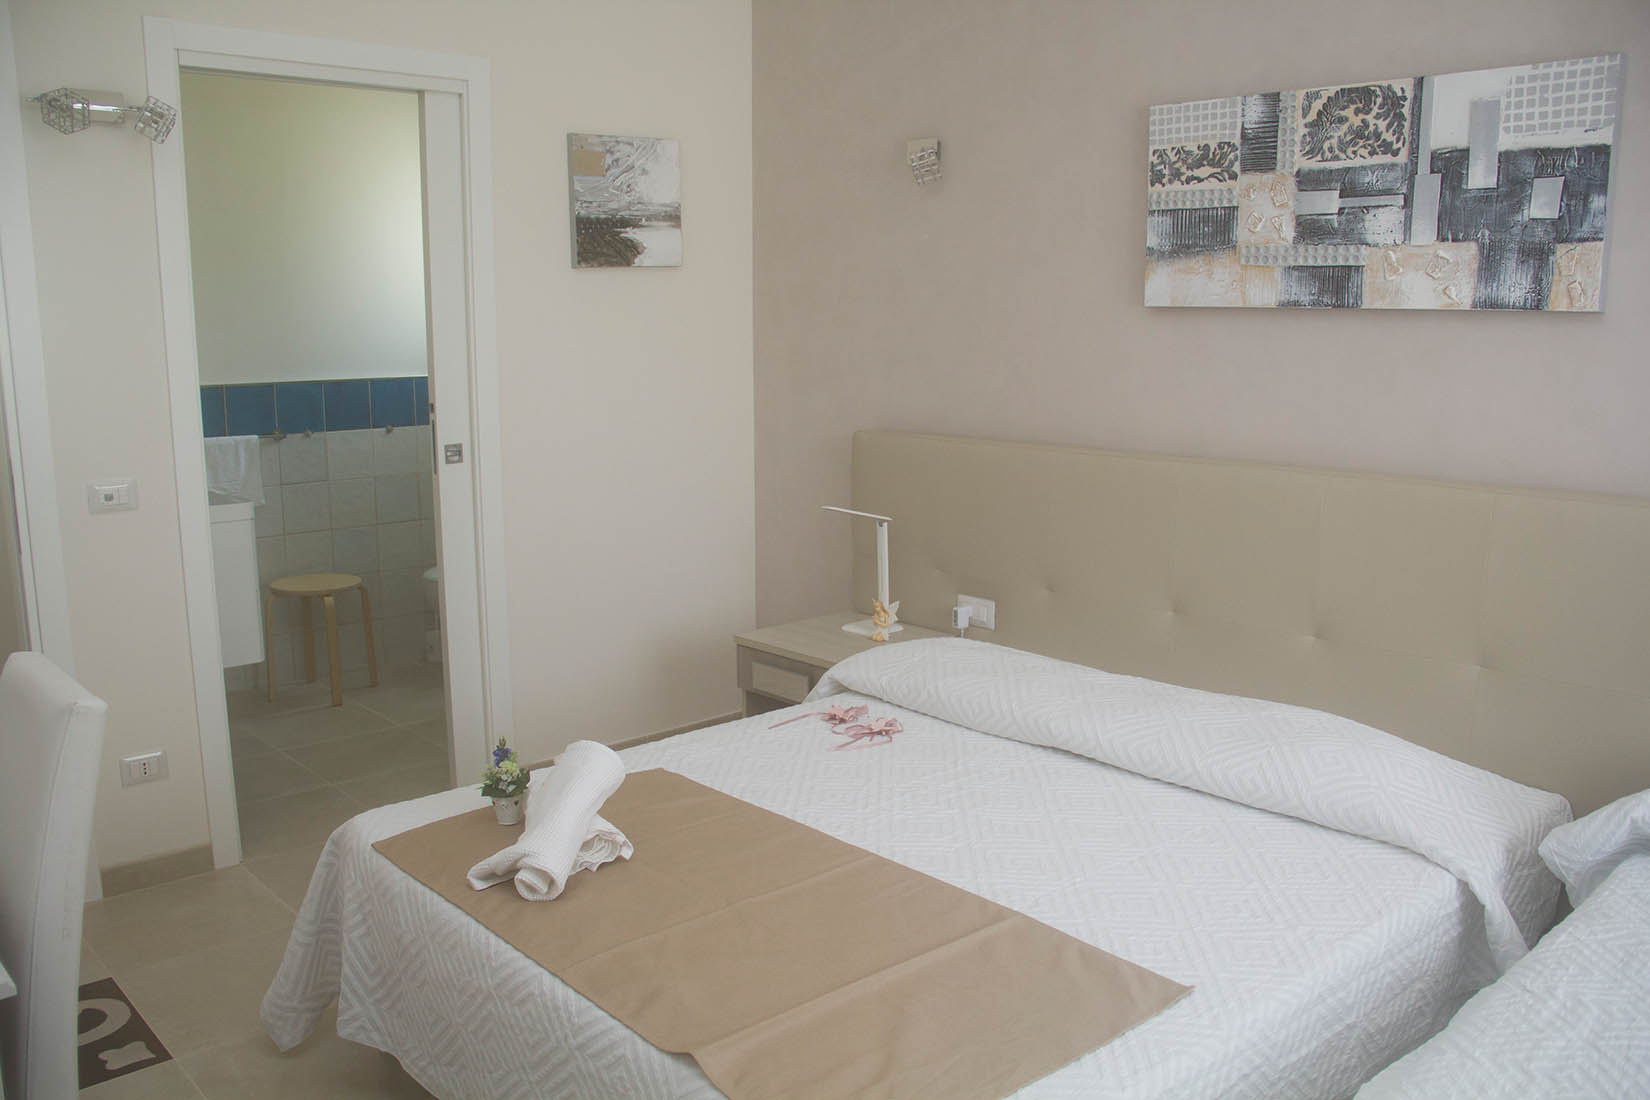 B&B Villa Eraclea - Agrigento, AG - The Valley of the Temples